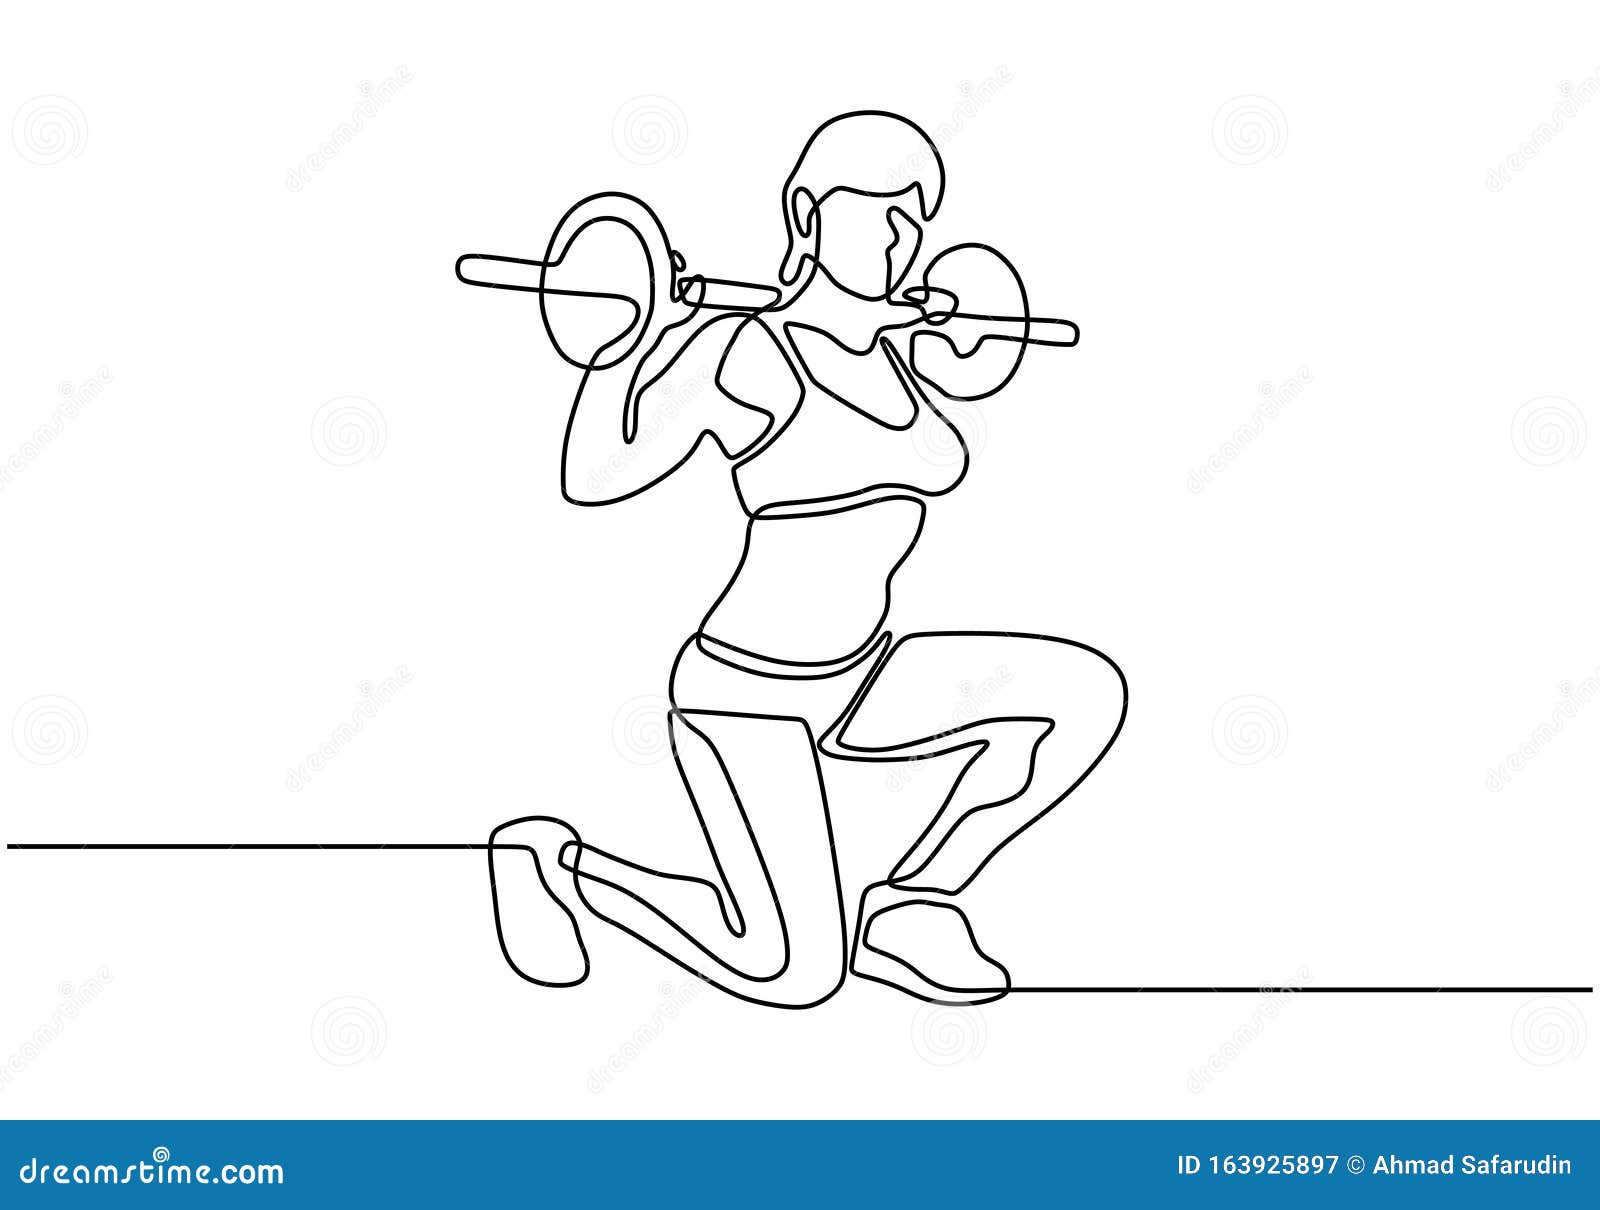 Weightlifting Deadlift Icon In Four Variations. Vector Illustration